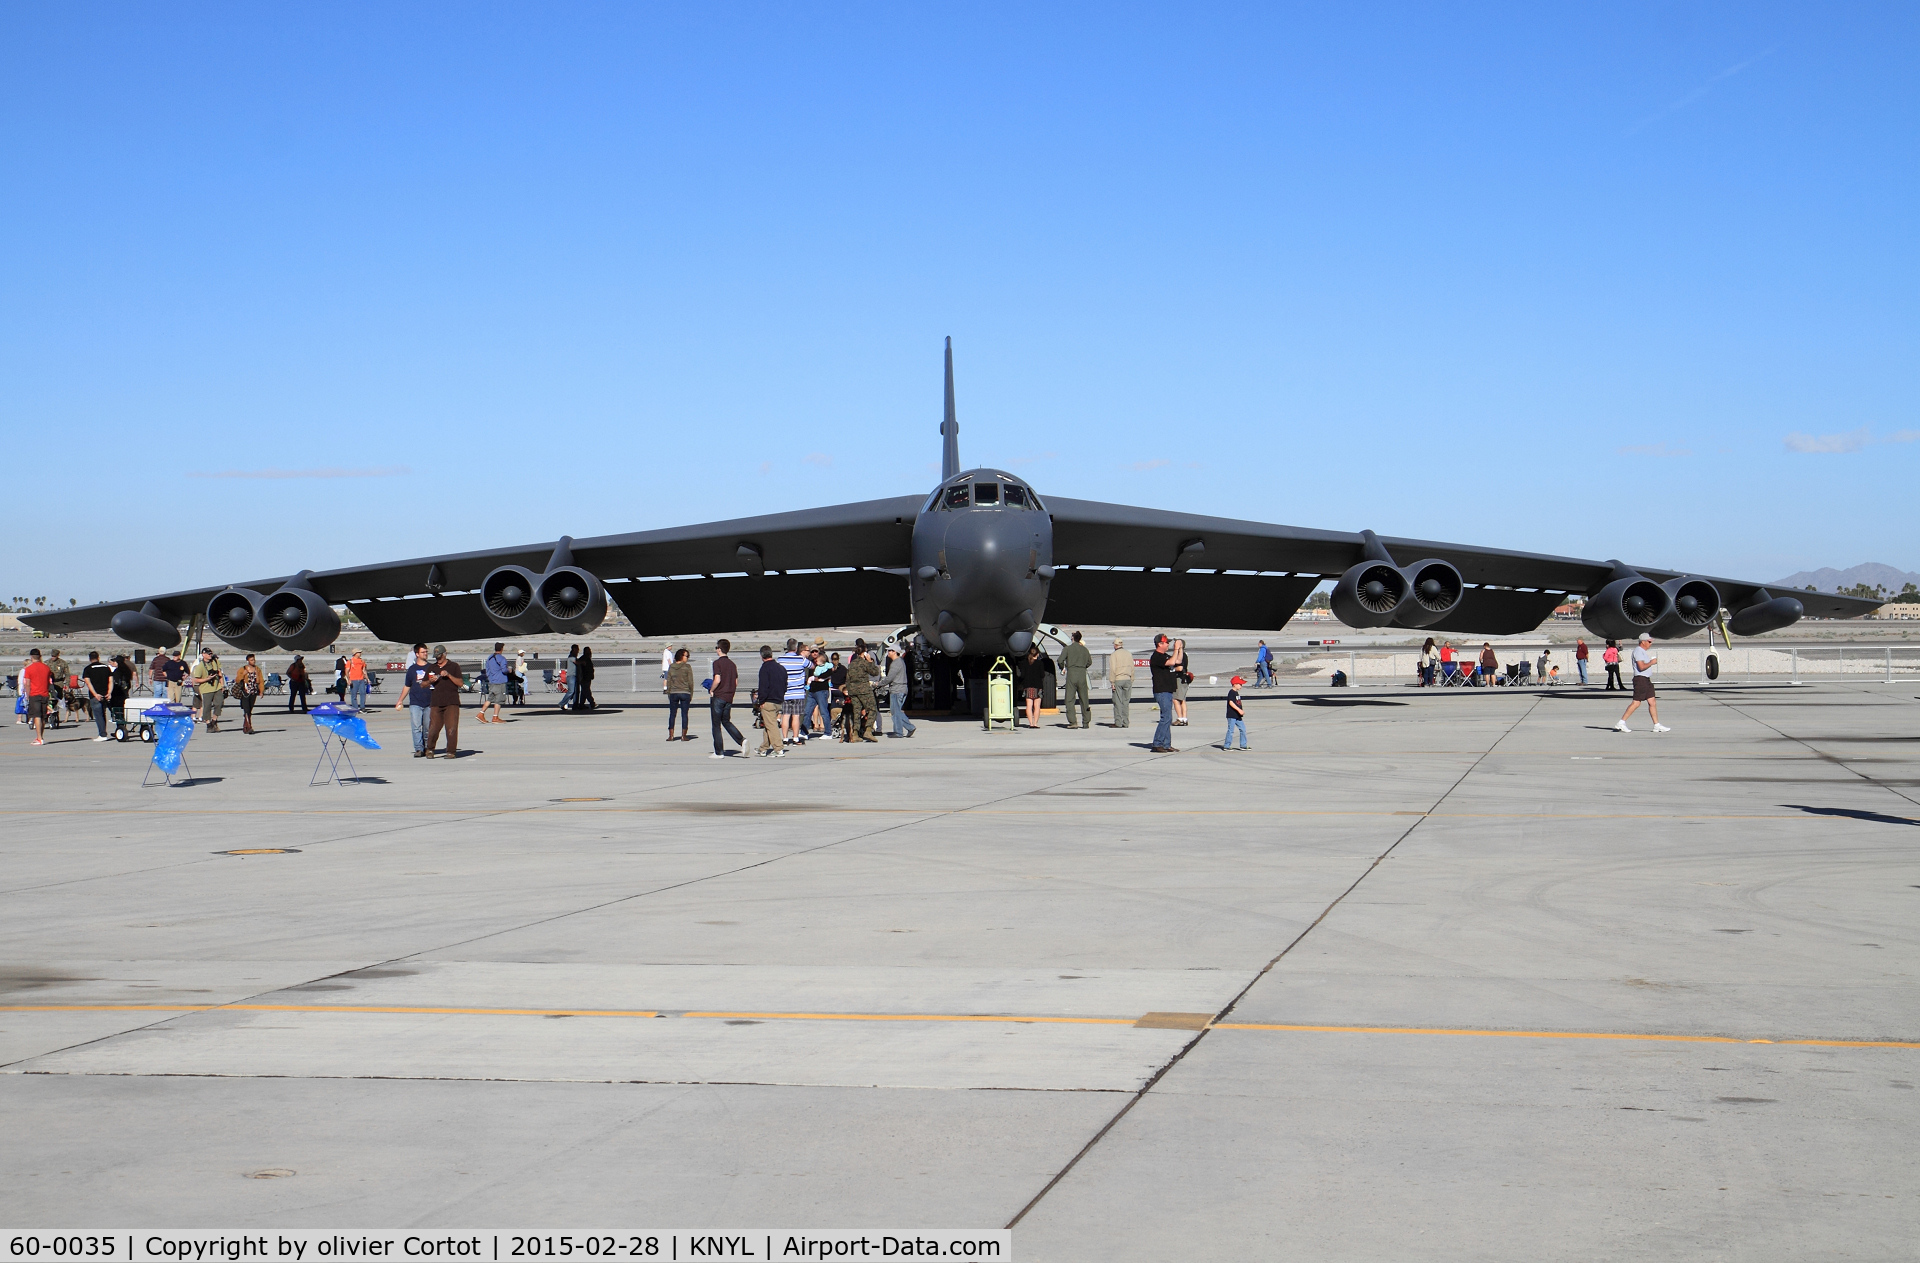 60-0035, 1960 Boeing B-52H Stratofortress C/N 464400, front view